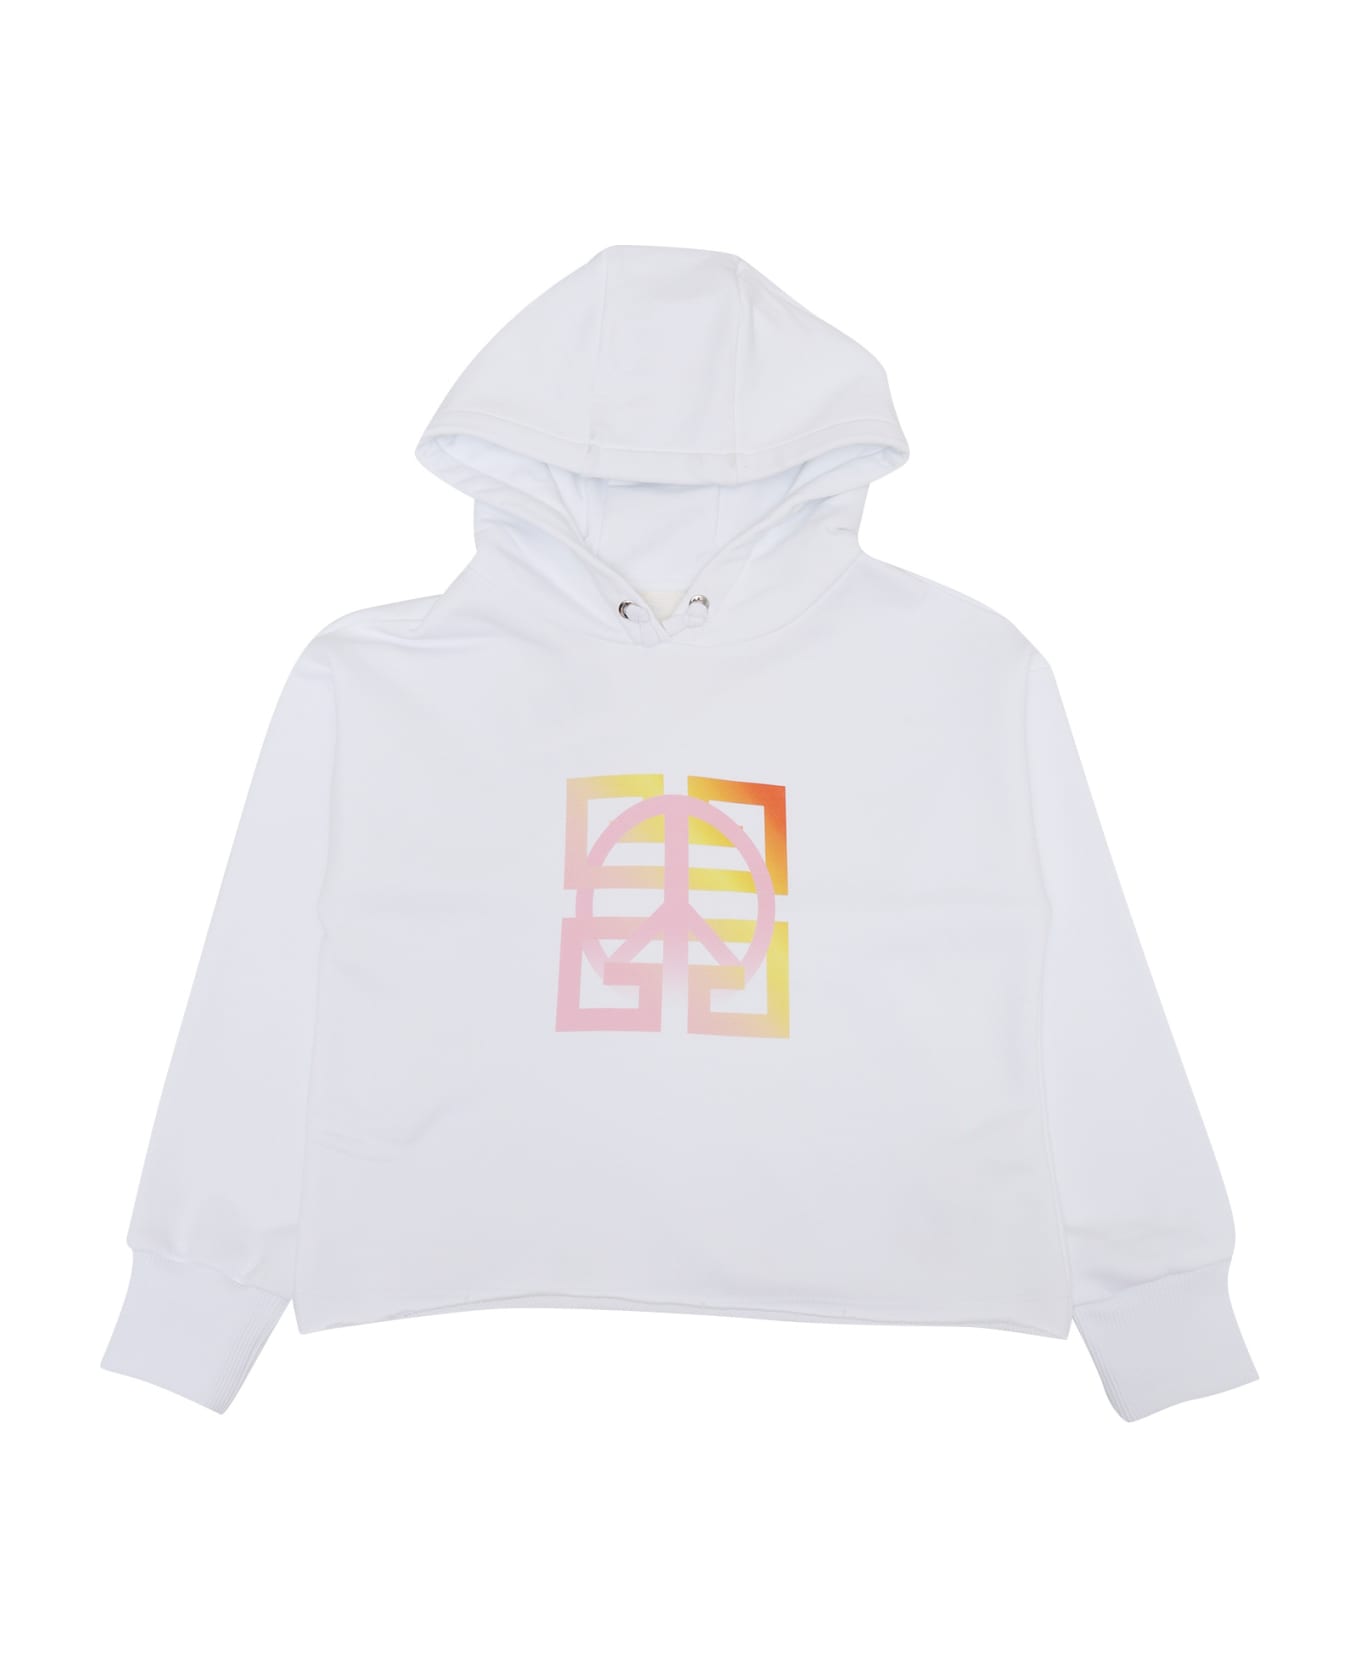 Givenchy 4g Peace Hoodie - WHITE